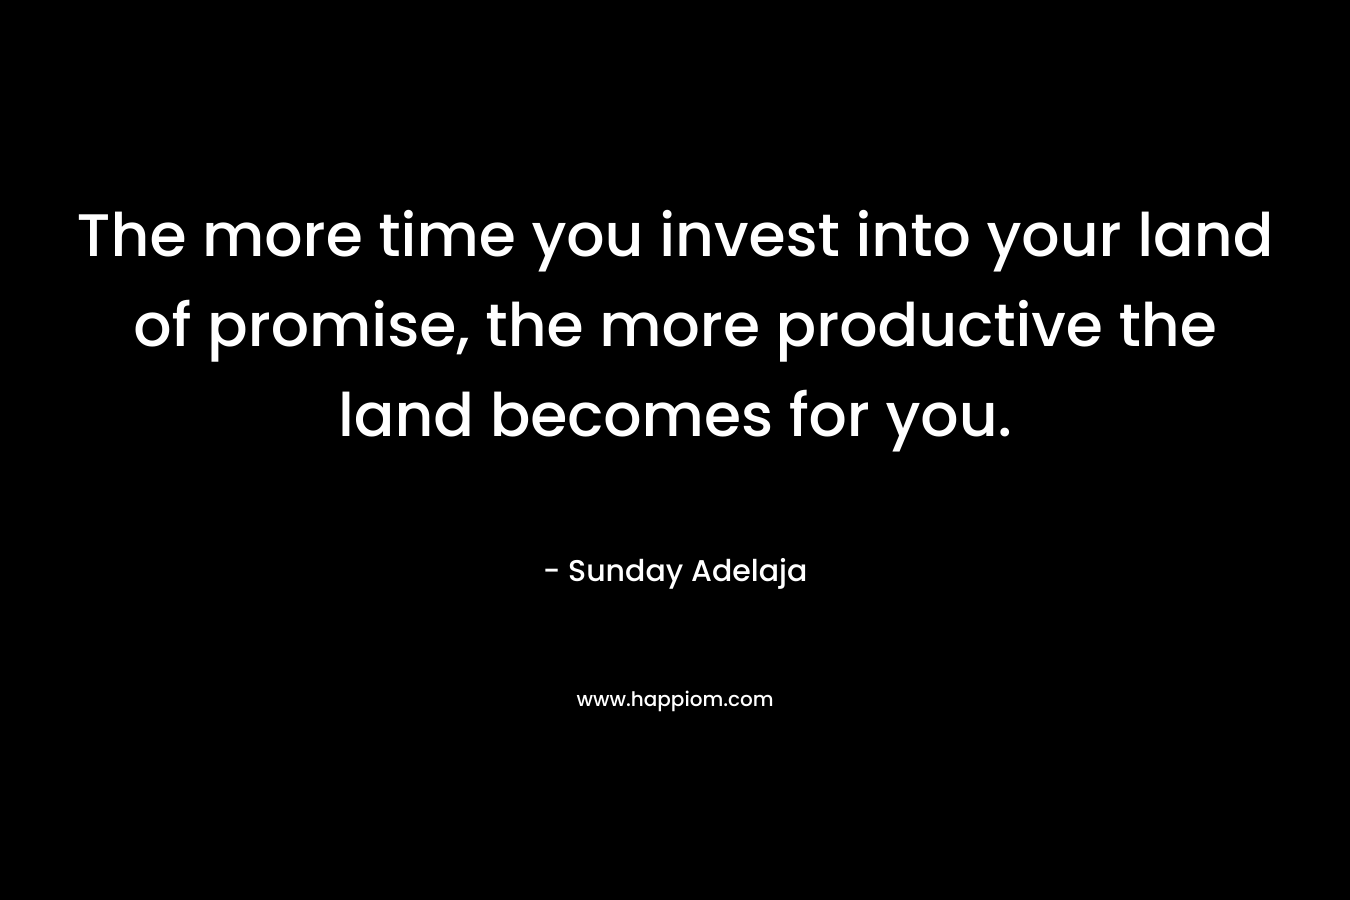 The more time you invest into your land of promise, the more productive the land becomes for you.